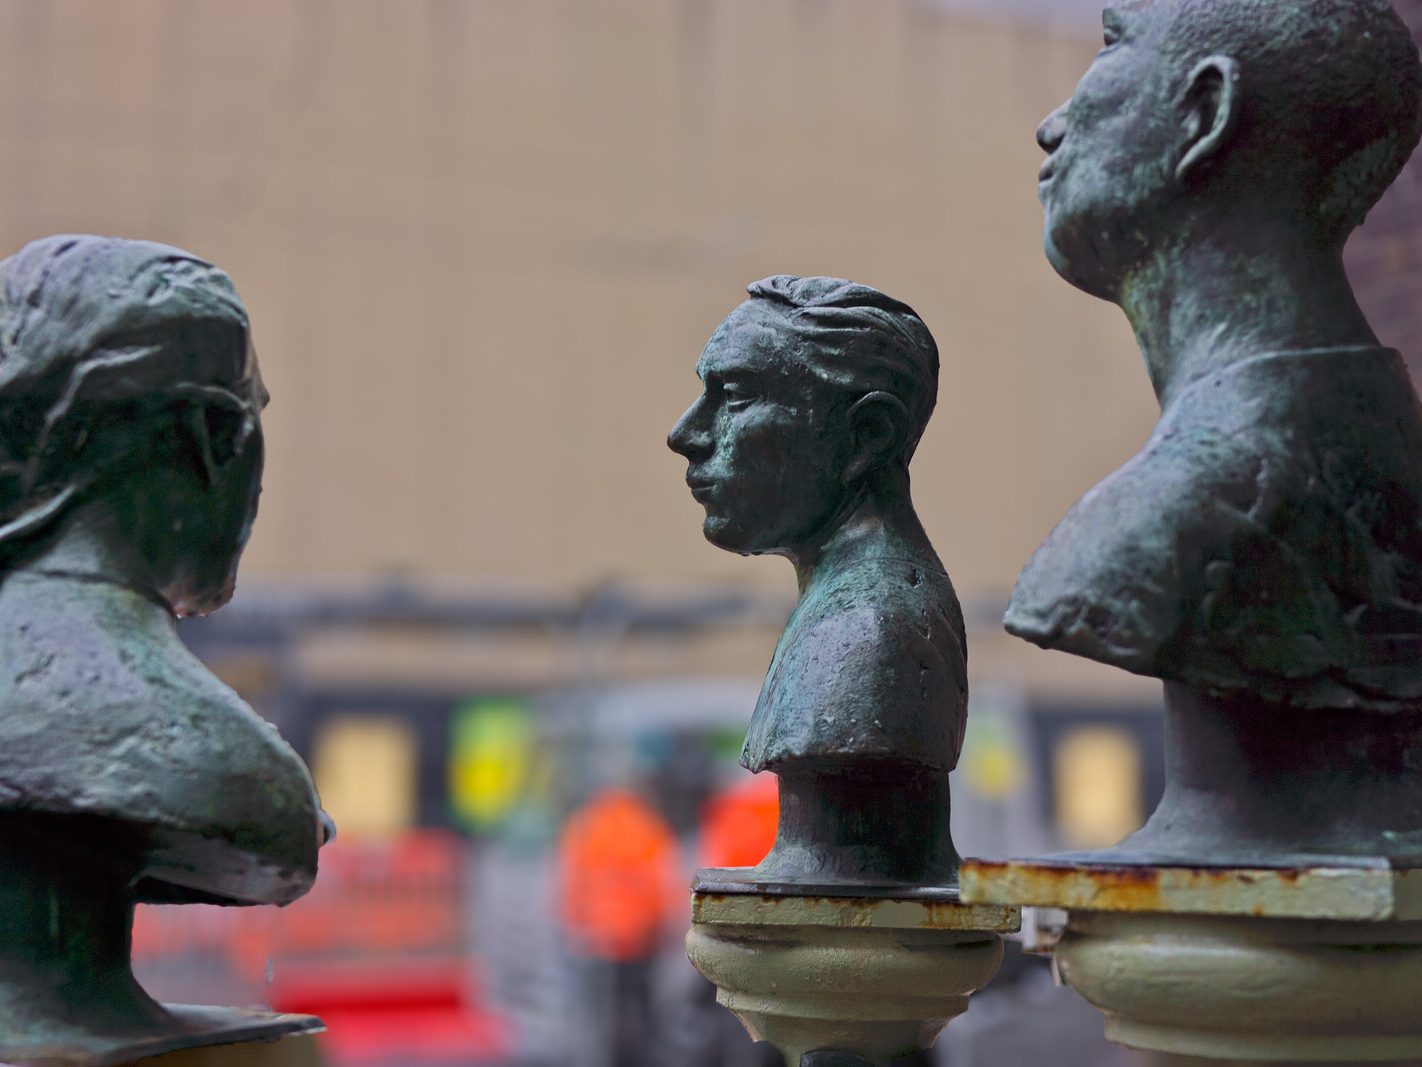 THE TALKING HEADS ON ABBEY STREET HAVE DISAPPEARED [MULTI PIECE SCULPTURE BY CAROLYN MULHOLLAND]-227456-1